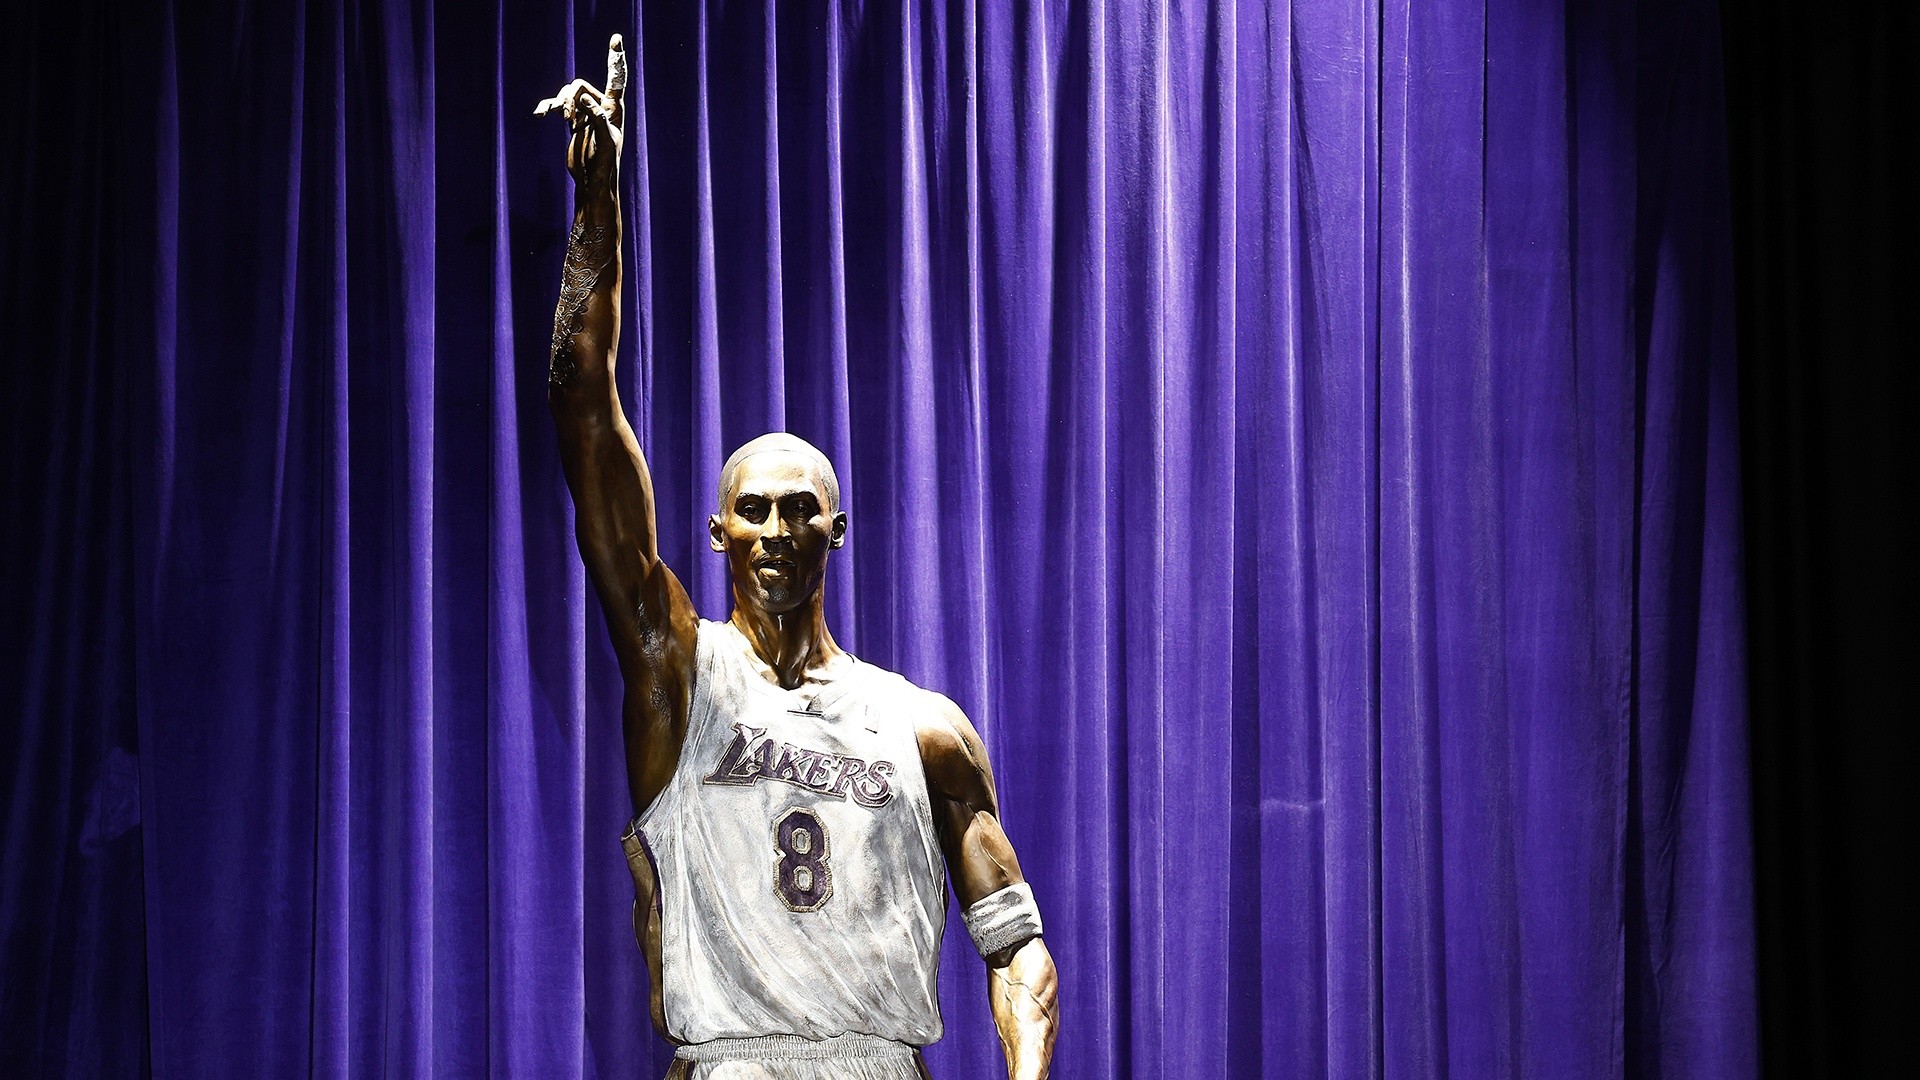 LA Lakers unveil a nearly 20-foot-tall statue of Kobe Bryant